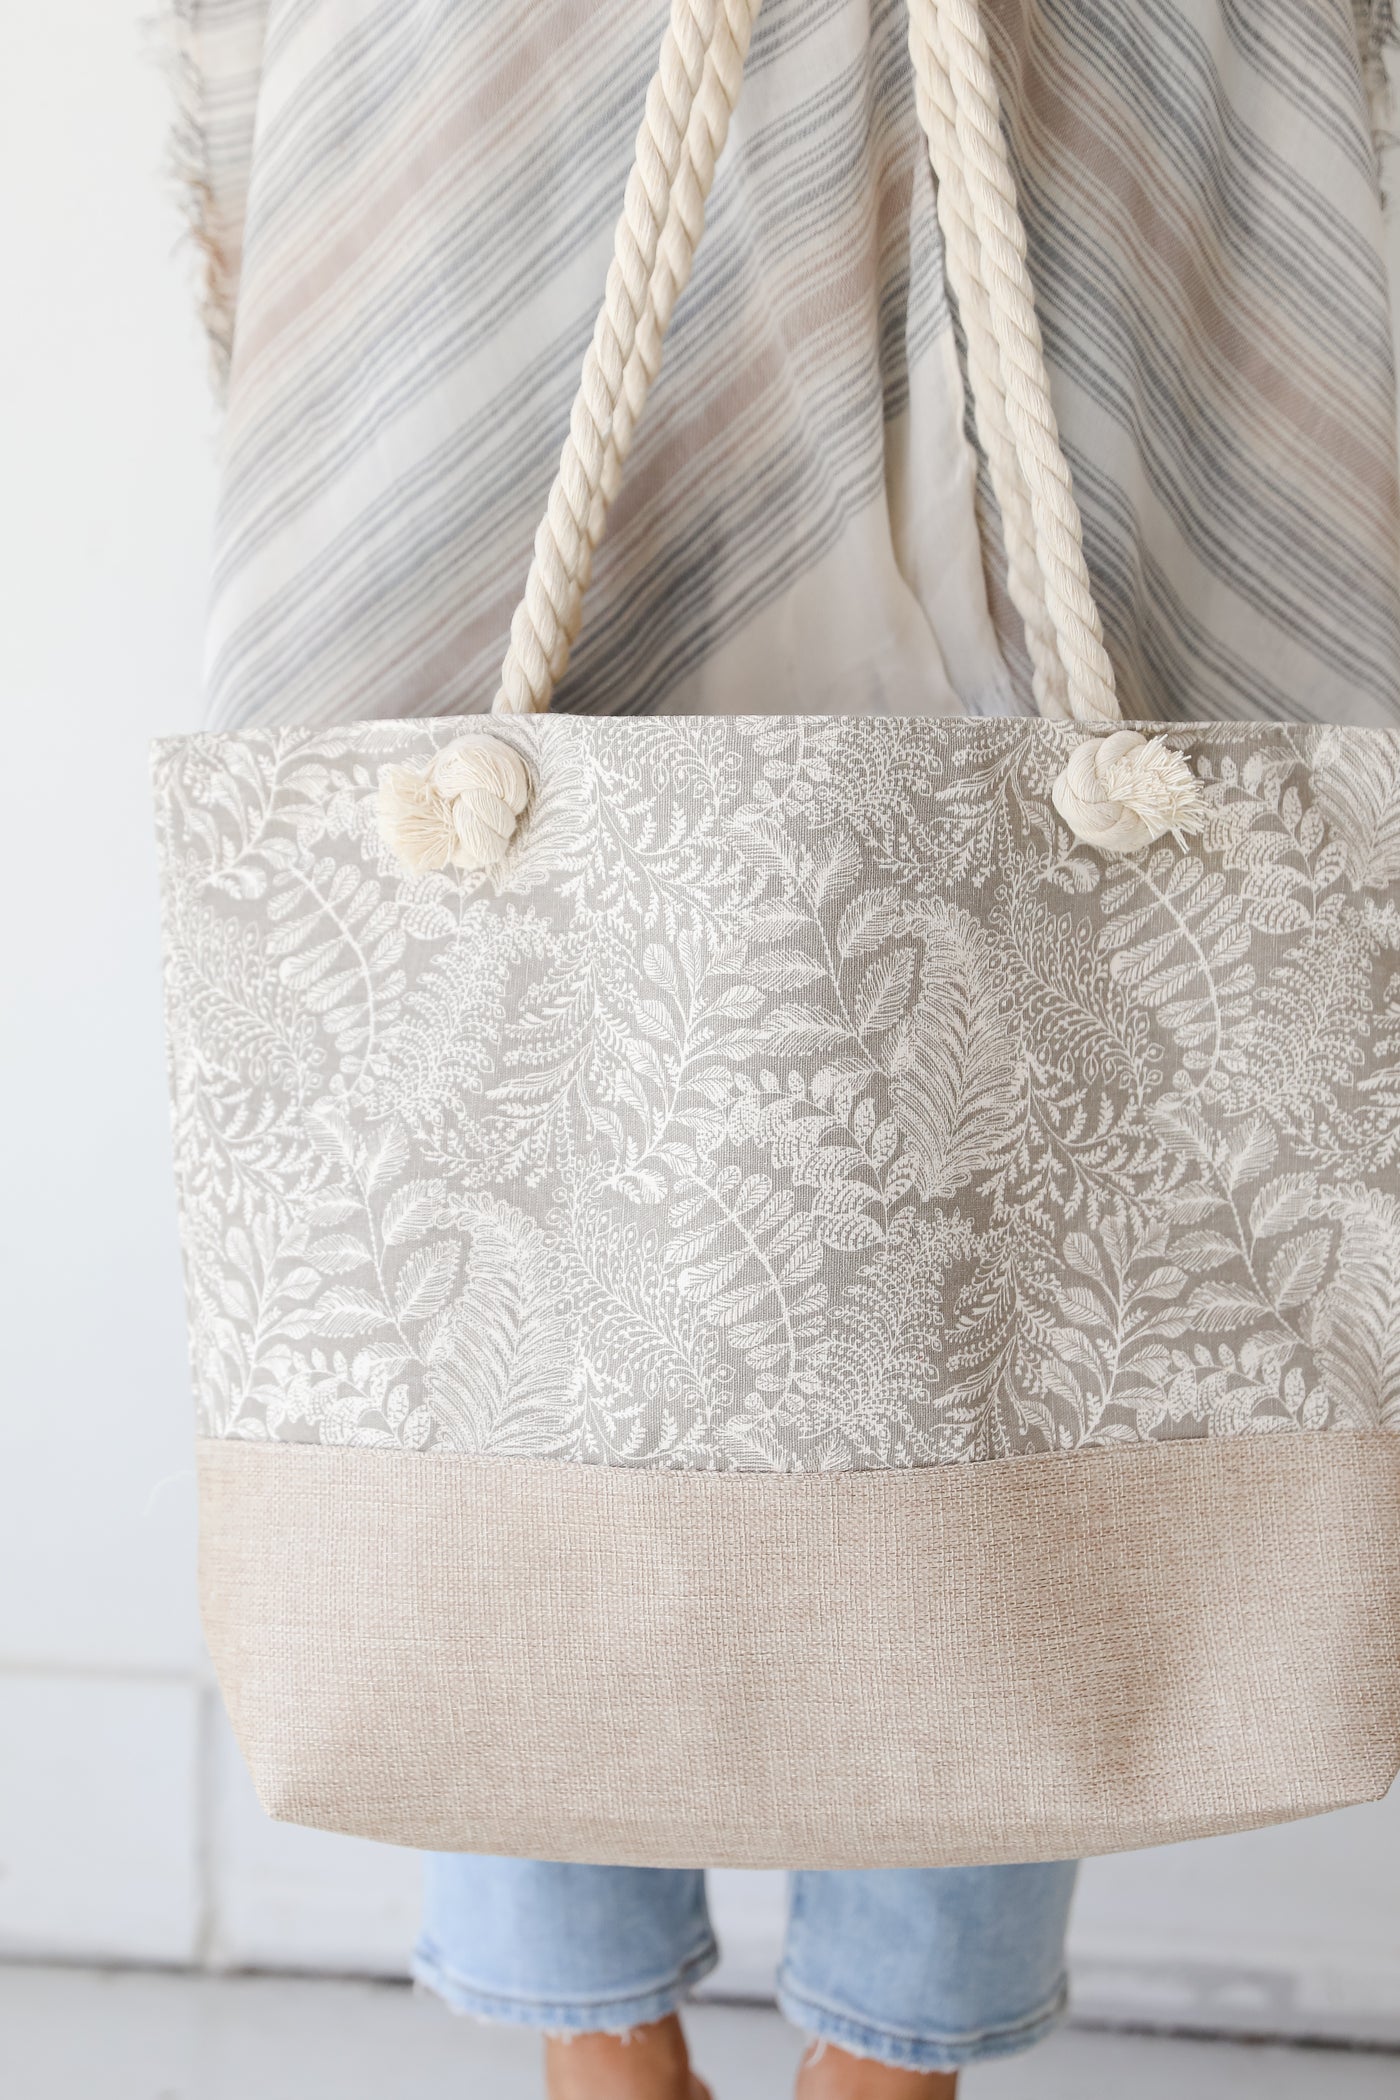 Taupe Tote Bag front view